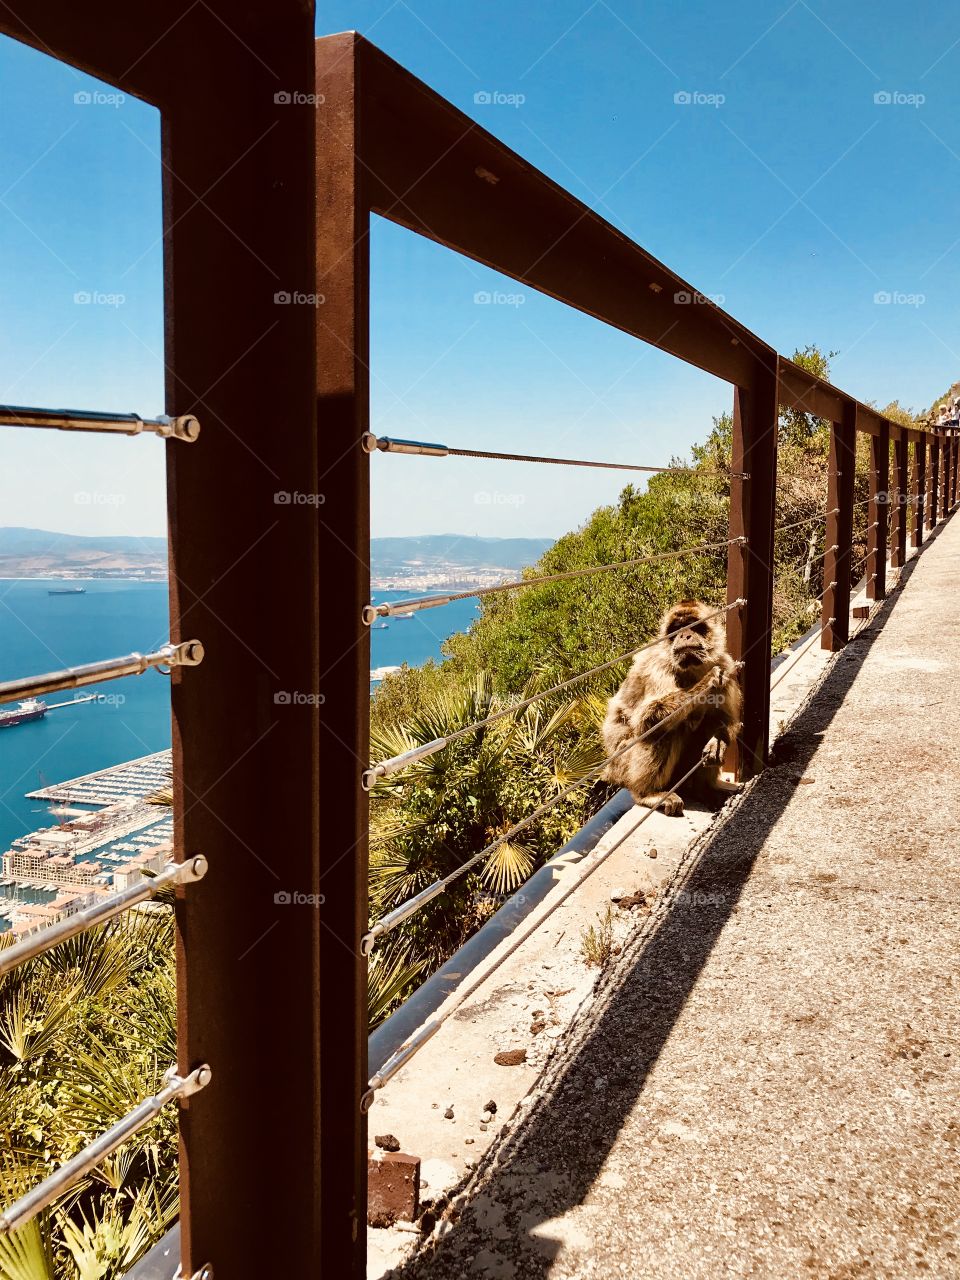 Gibraltar was awesome, beautiful blue sky with the contrast of a rusty fence. And a little monkey